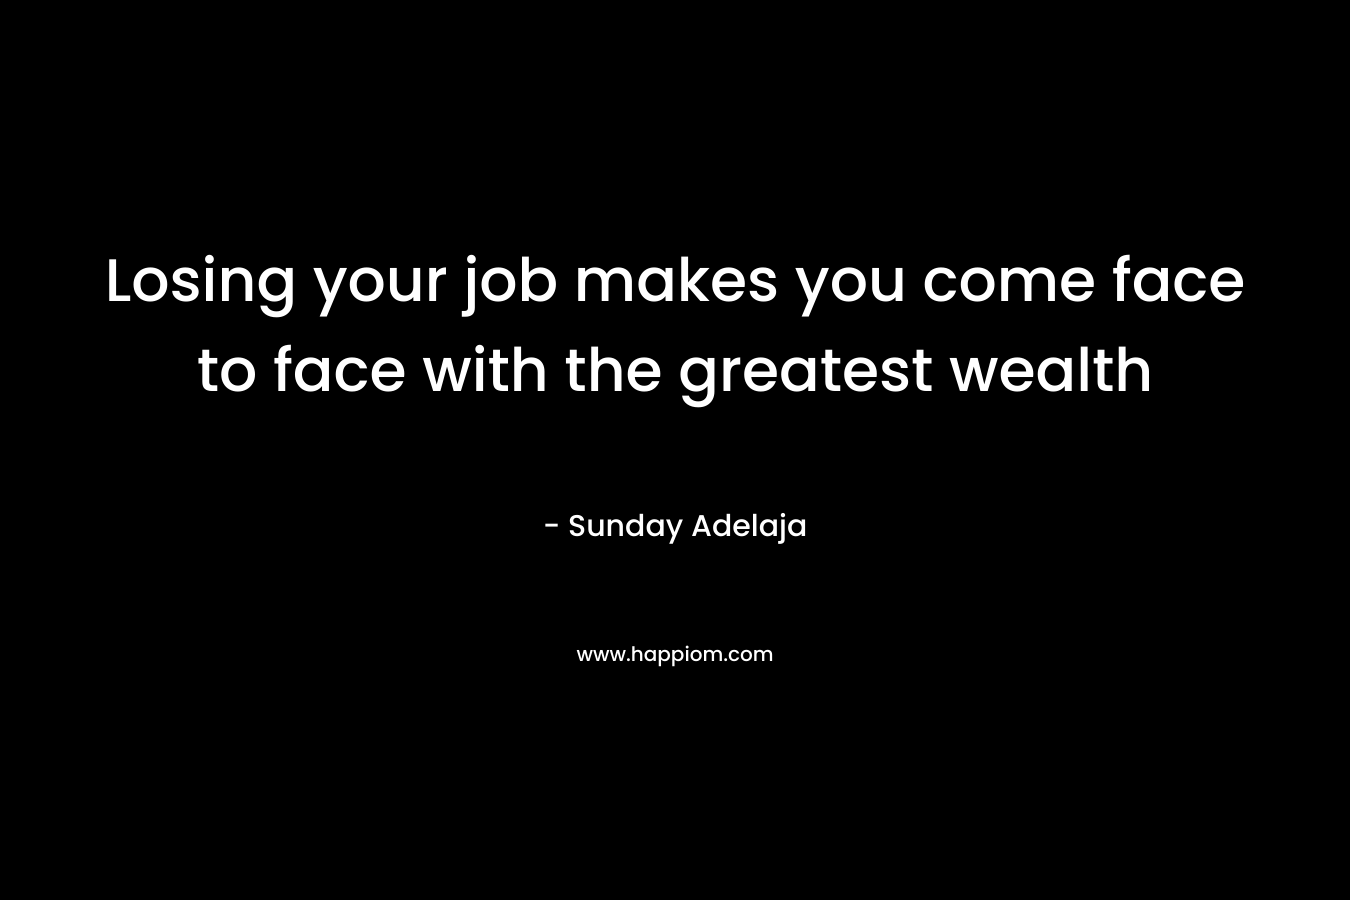 Losing your job makes you come face to face with the greatest wealth